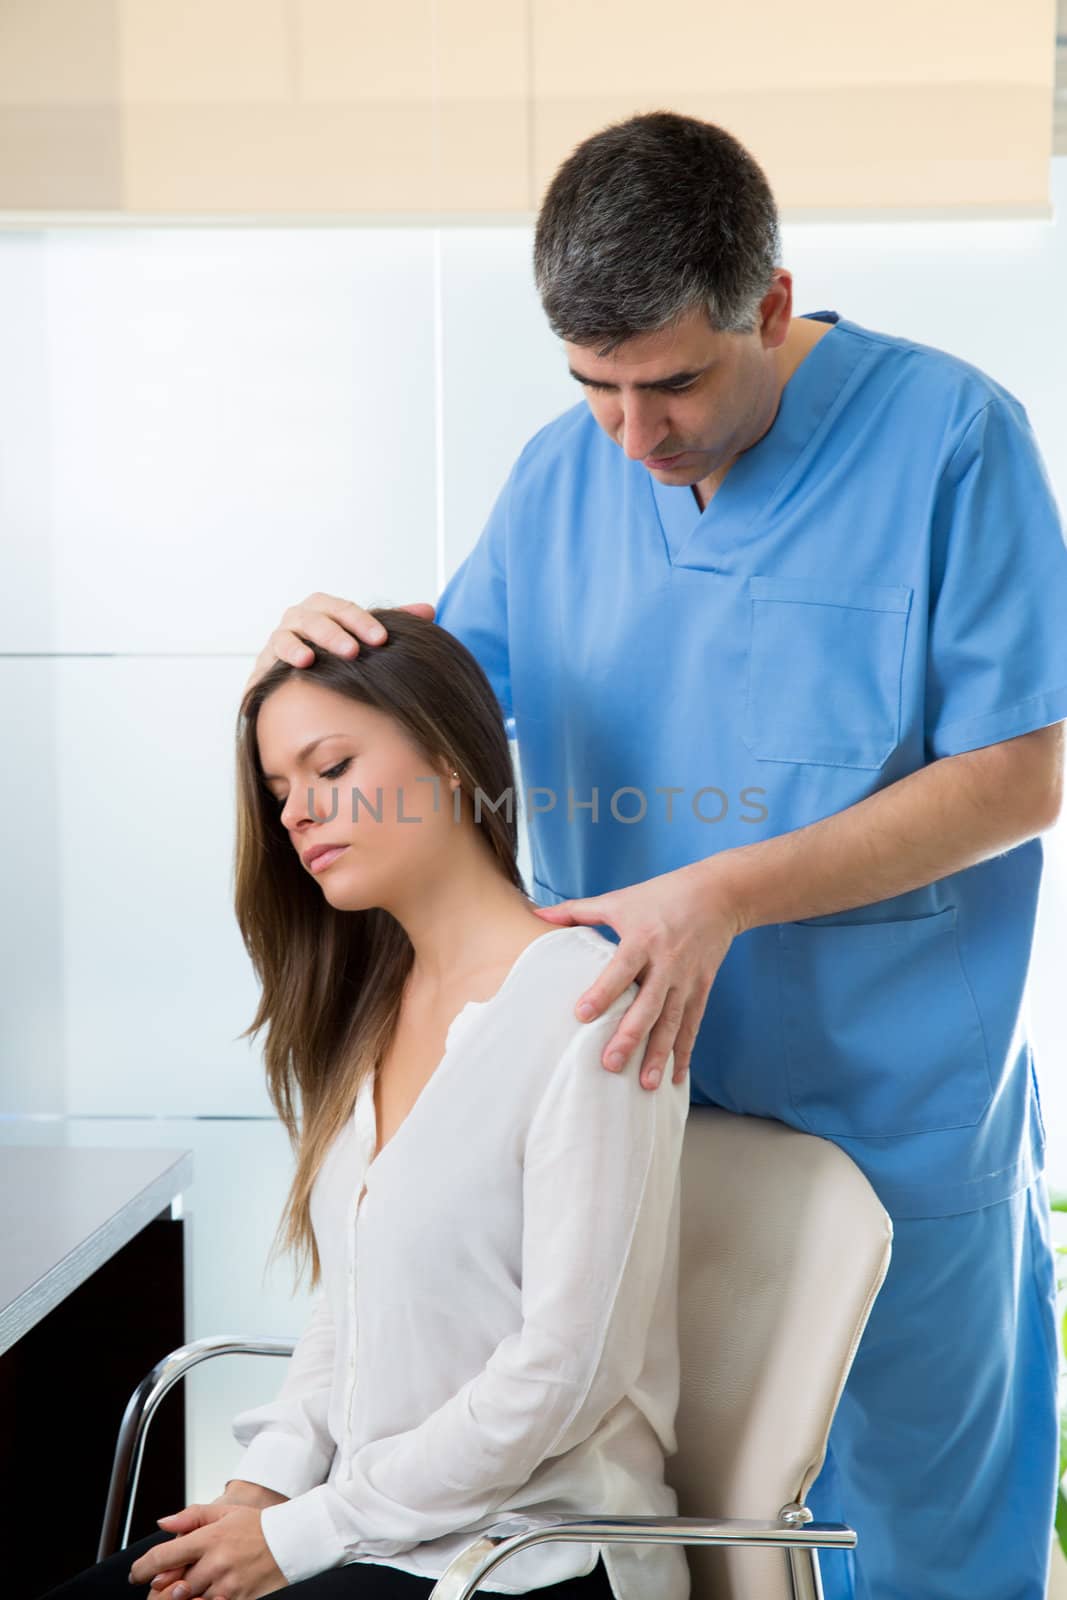 physiotherapist doing myofascial therapy on woman patient in hospital